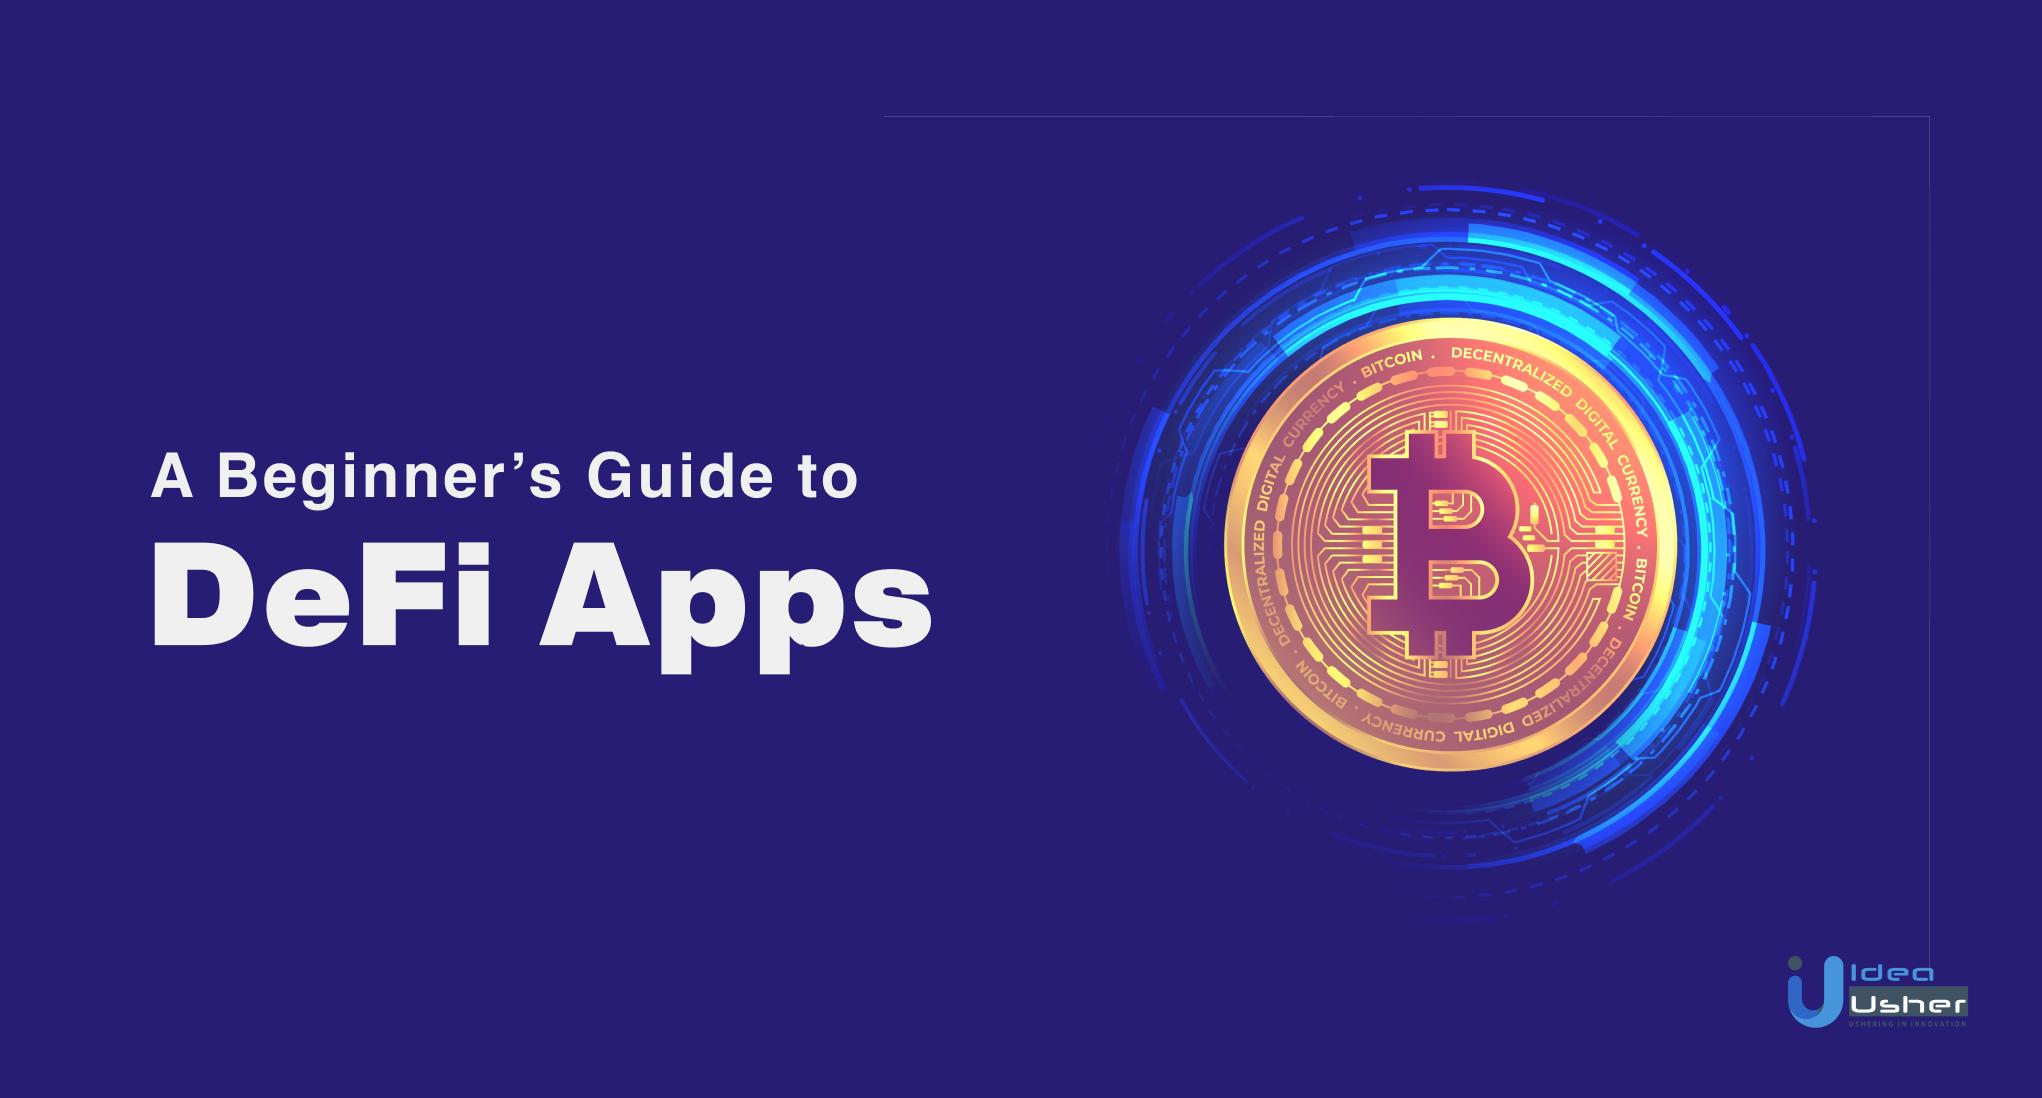 A Beginner's Guide To DeFi Apps